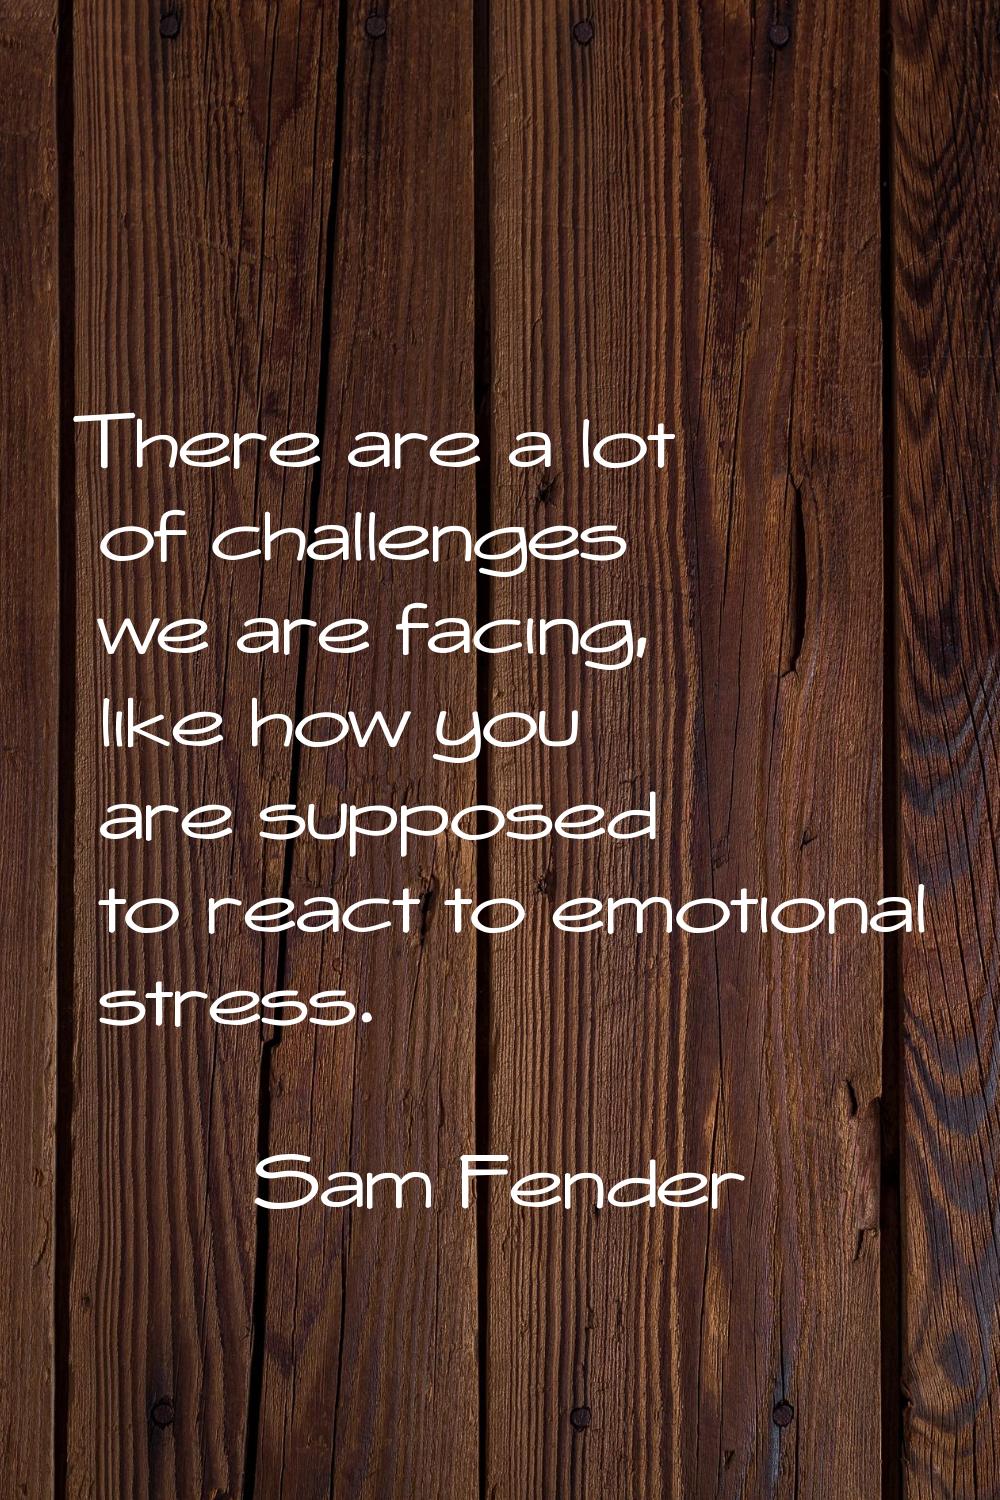 There are a lot of challenges we are facing, like how you are supposed to react to emotional stress